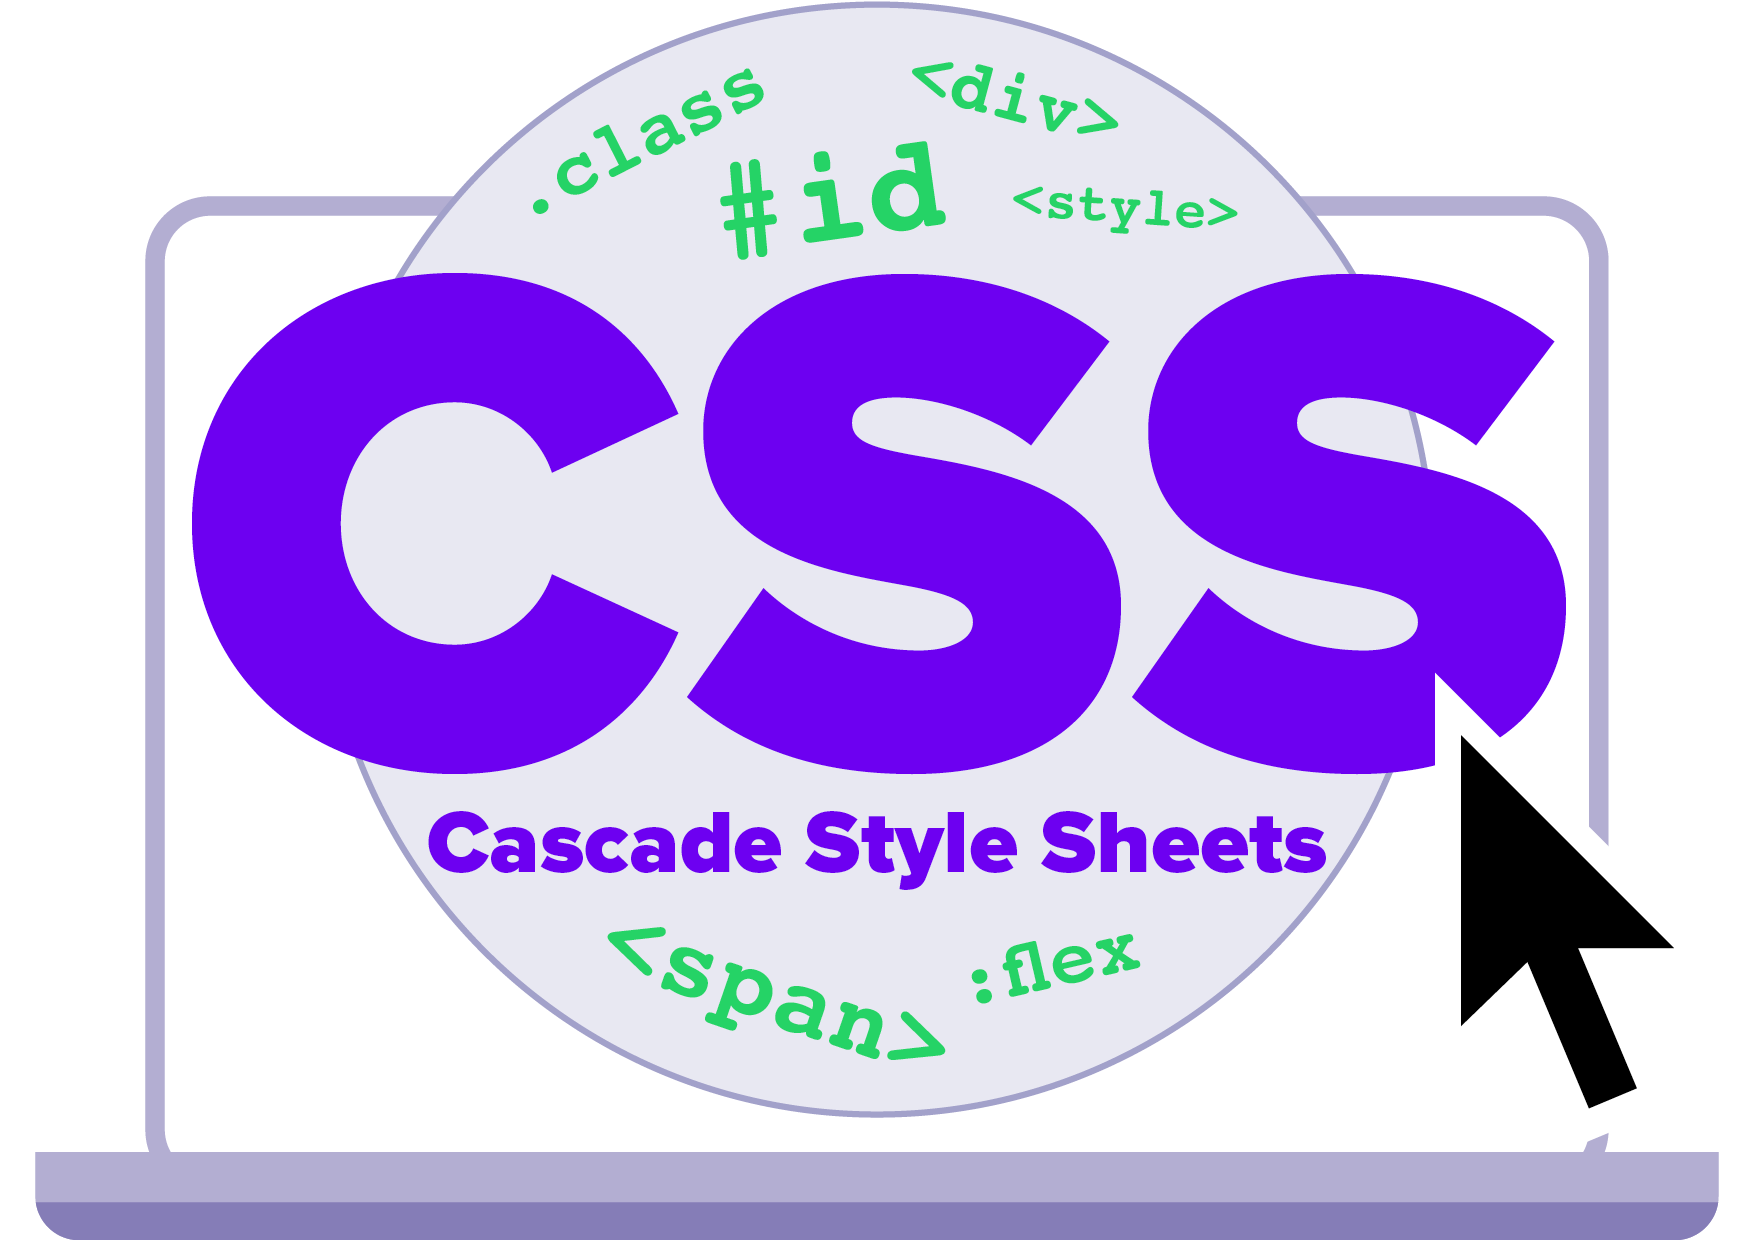 How To Add CSS To Your WordPress Website: A Step-By-Step Guide